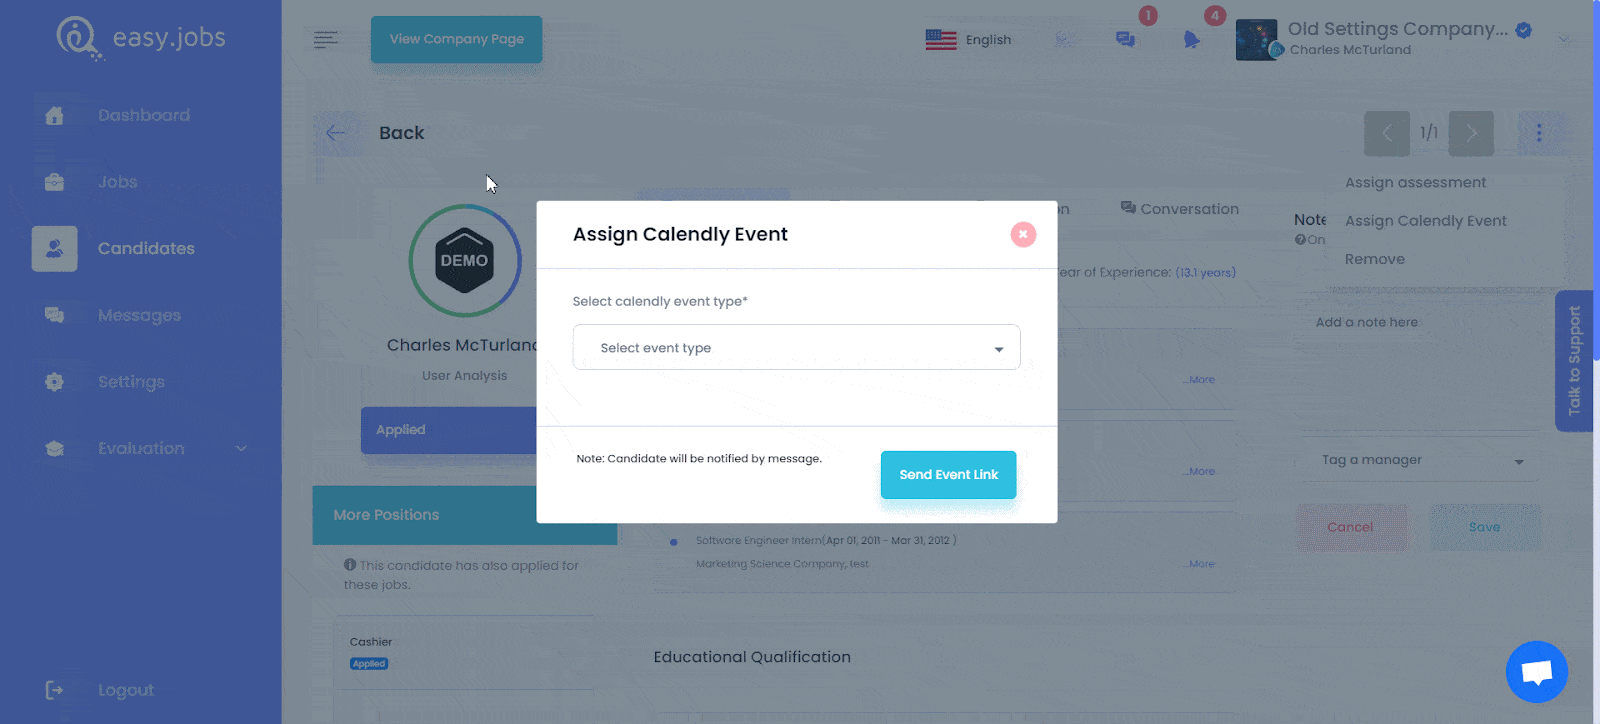 Integrate Calendly With easy.jobs